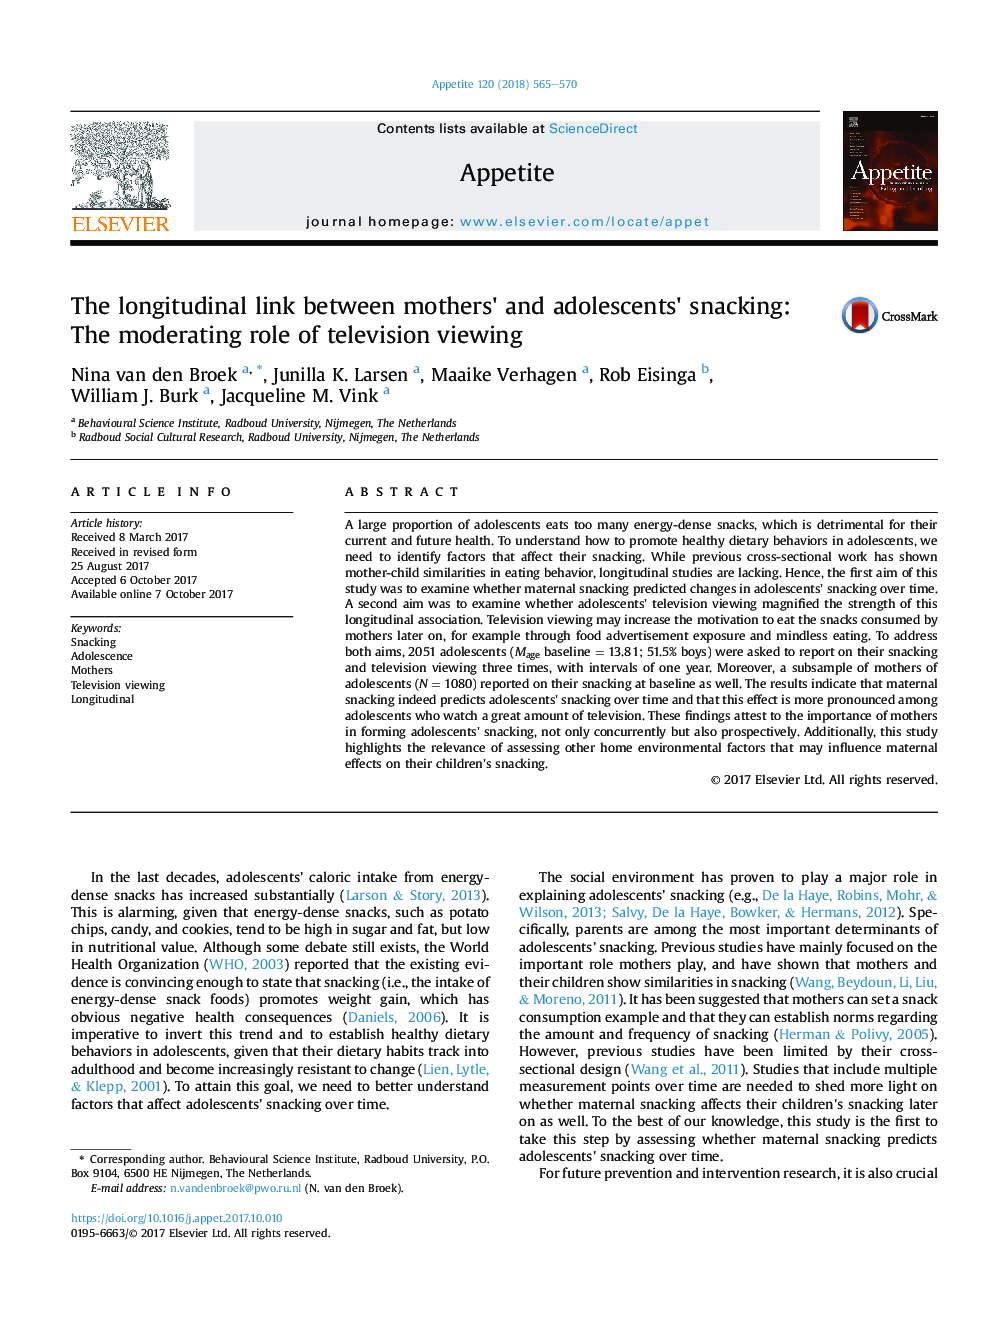 The longitudinal link between mothers' and adolescents' snacking: The moderating role of television viewing